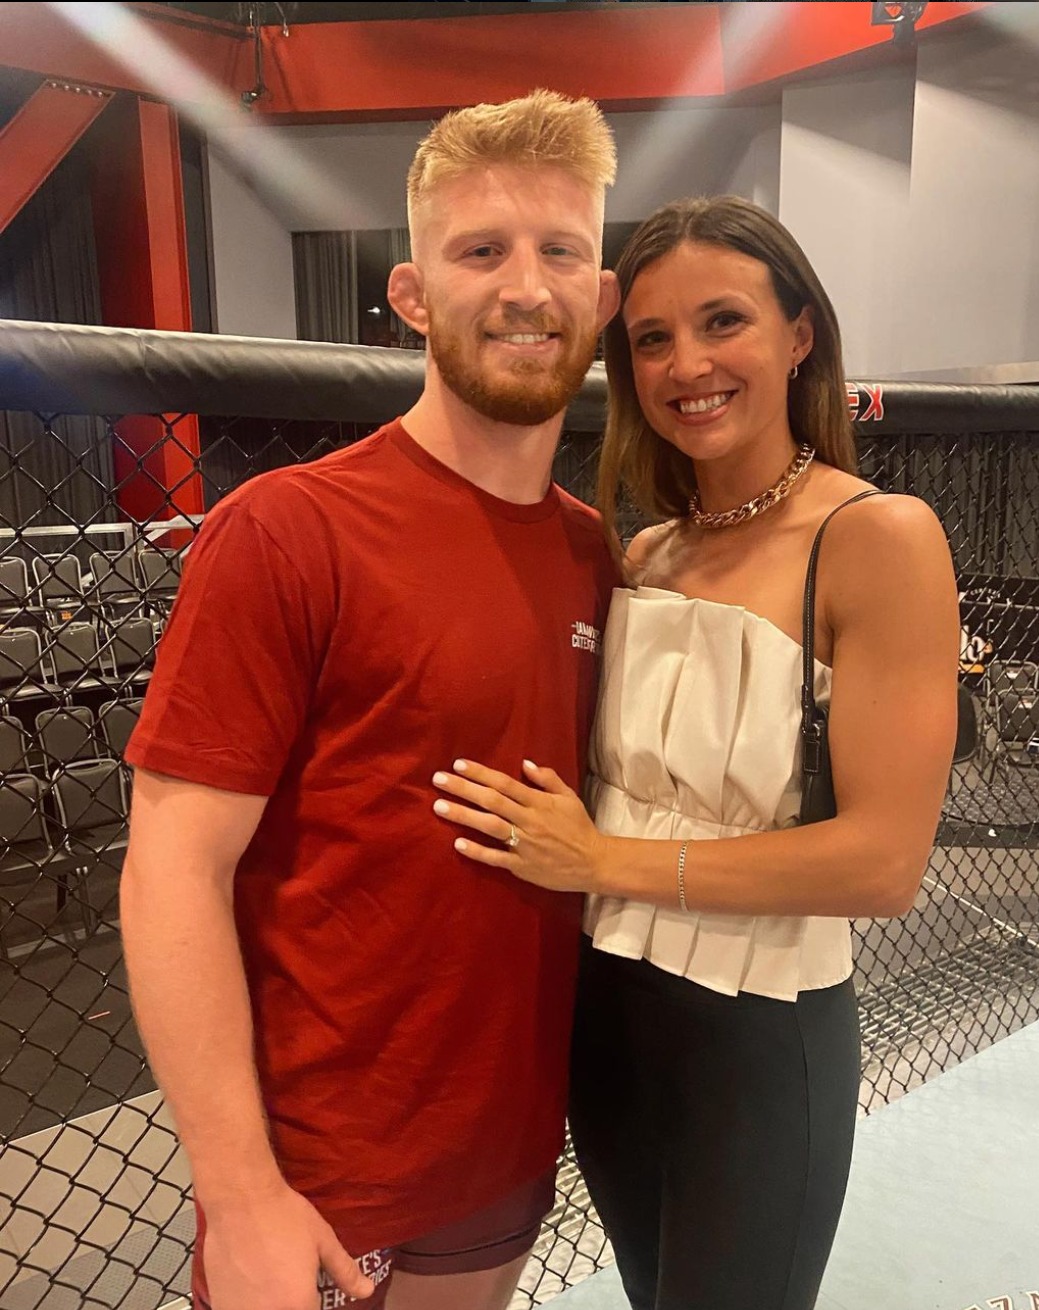 Maddie has been with Bo every step of the way of his brief MMA career